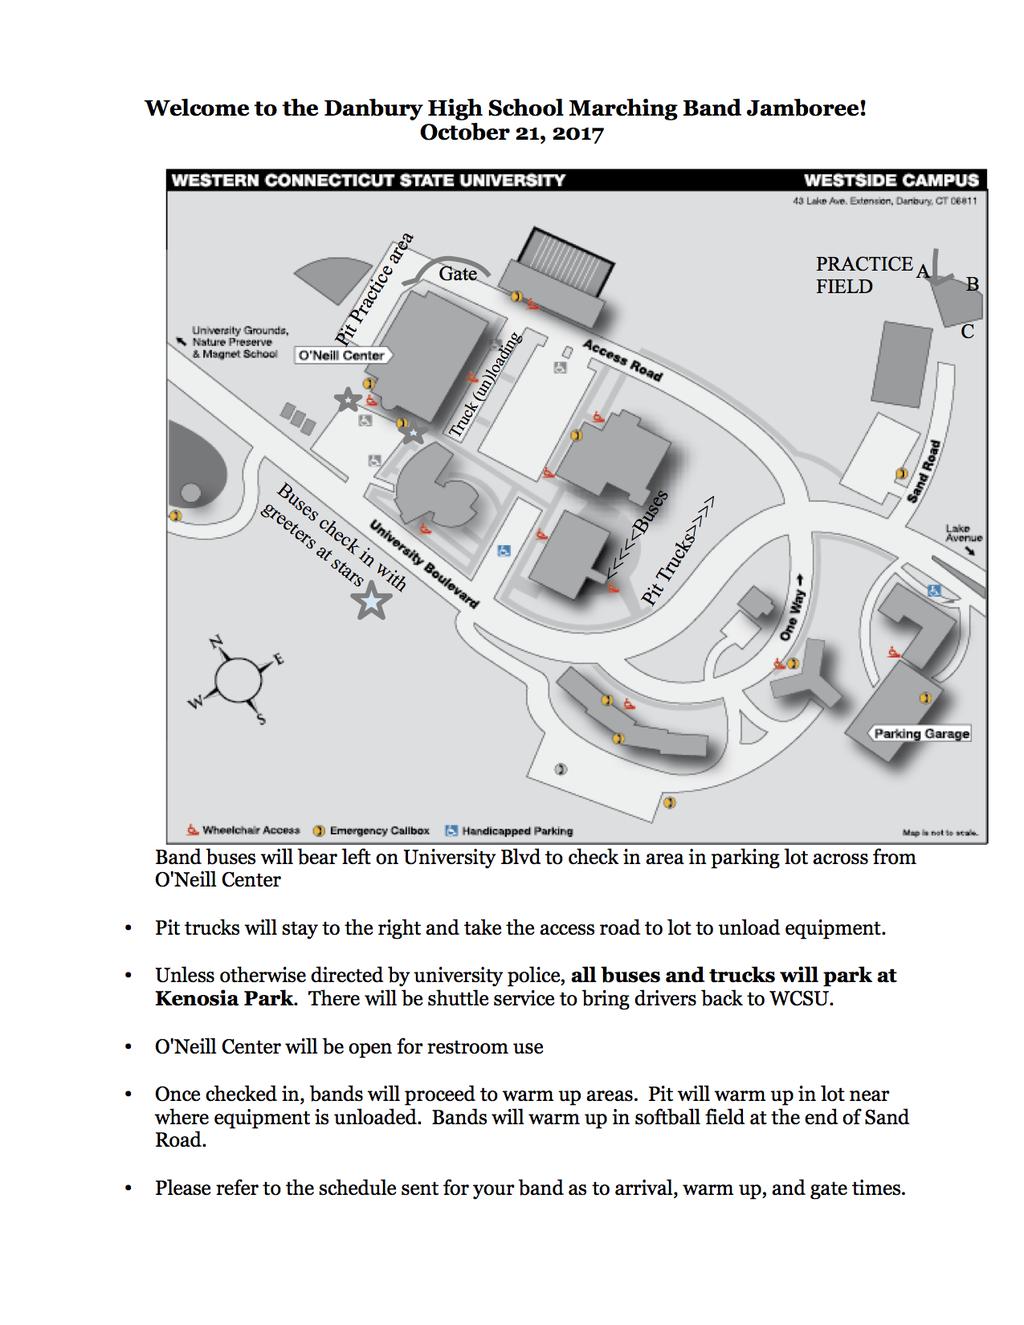 SITE OVERVIEW MAP Danbury High